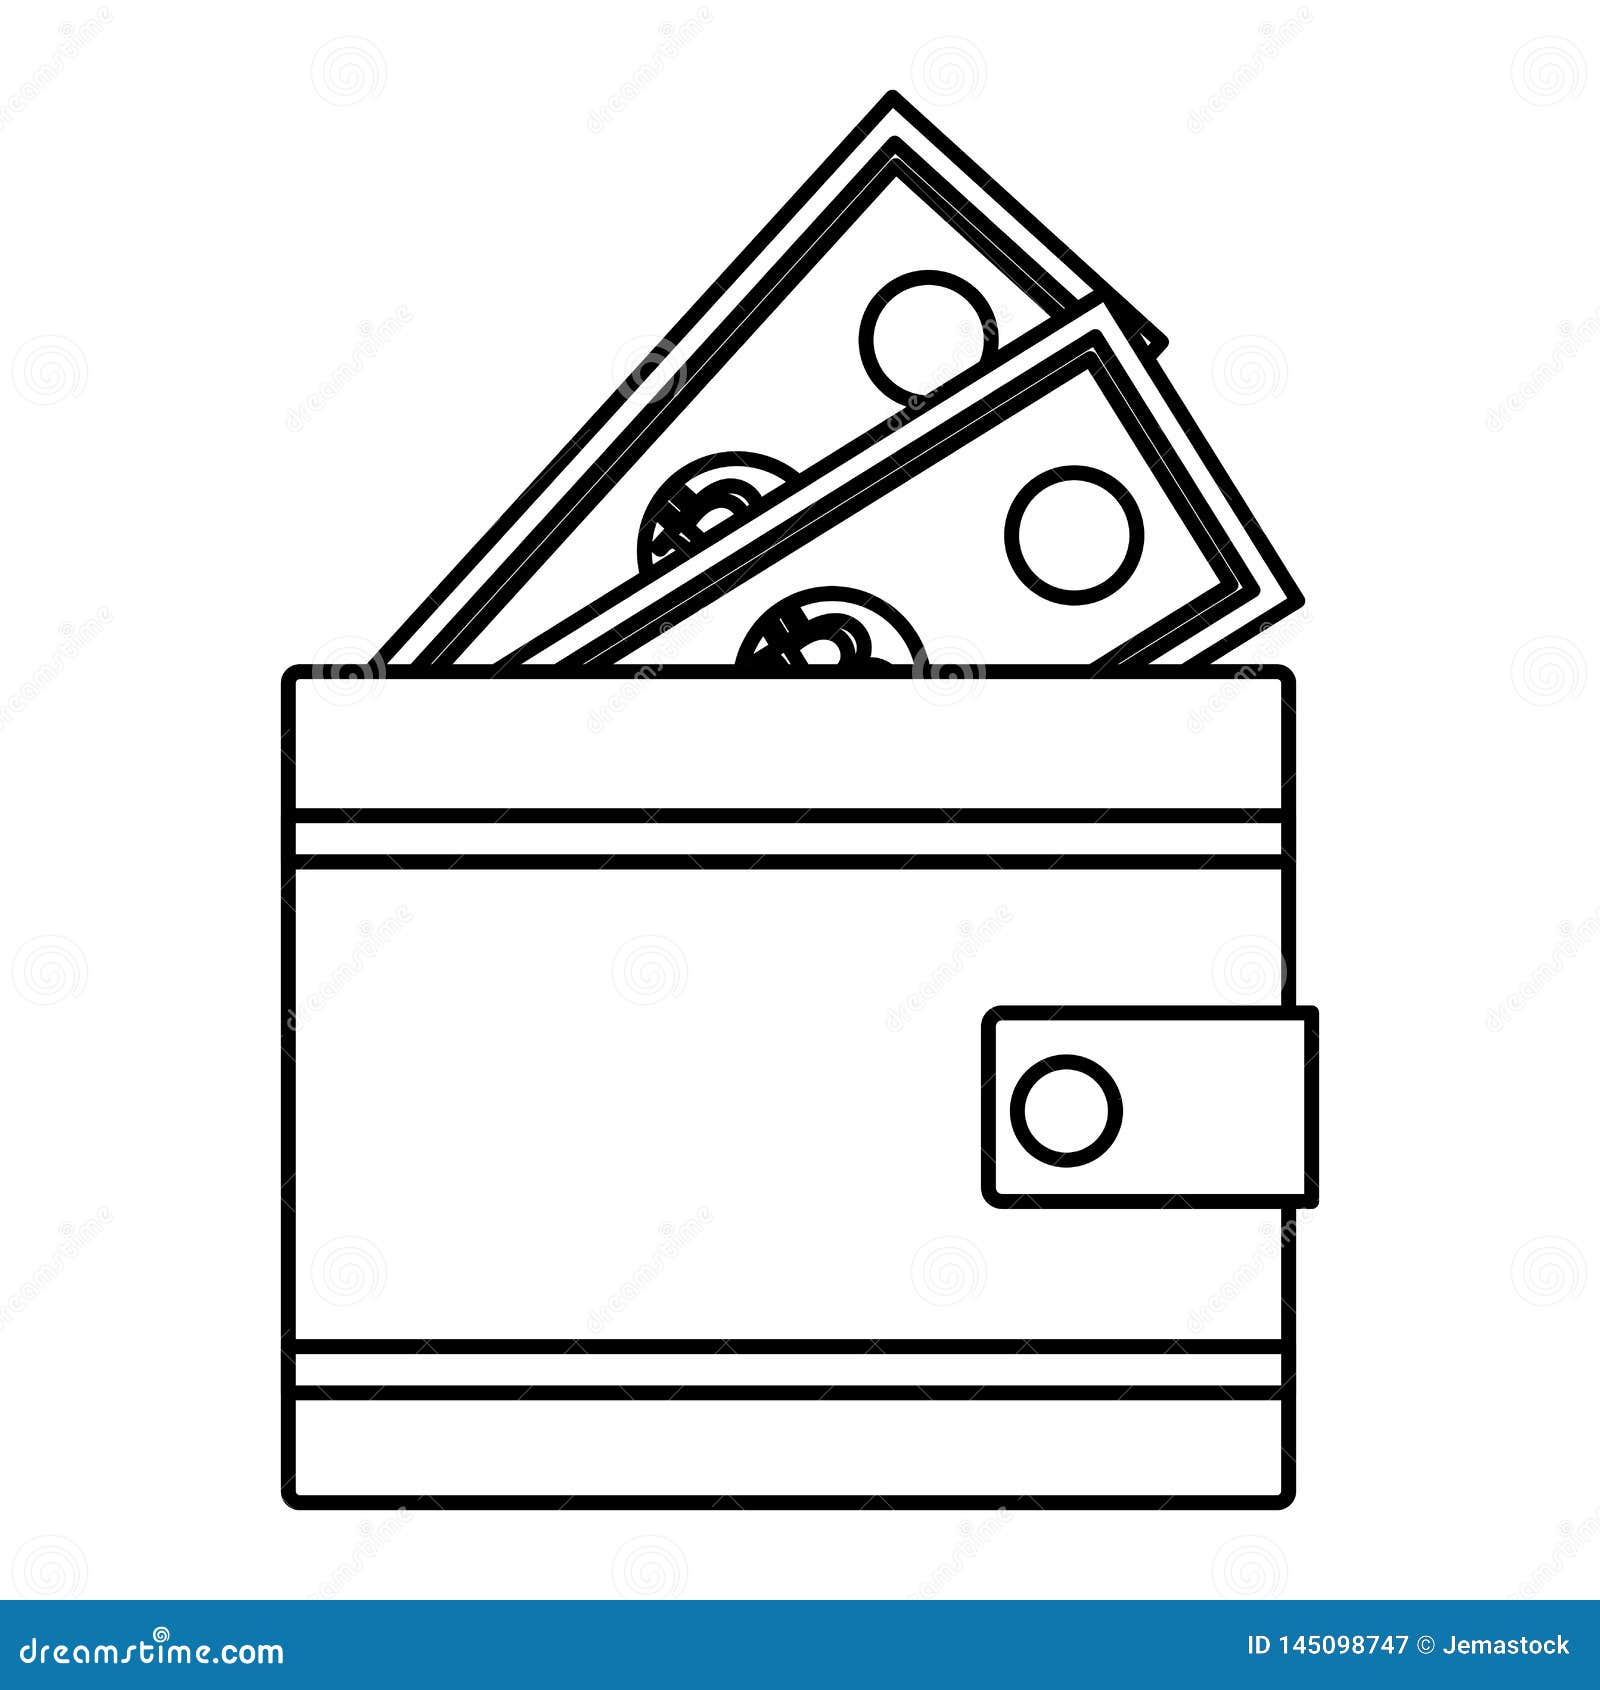 Wallet With Bills Black And White Stock Vector - Illustration of saving, card: 145098747